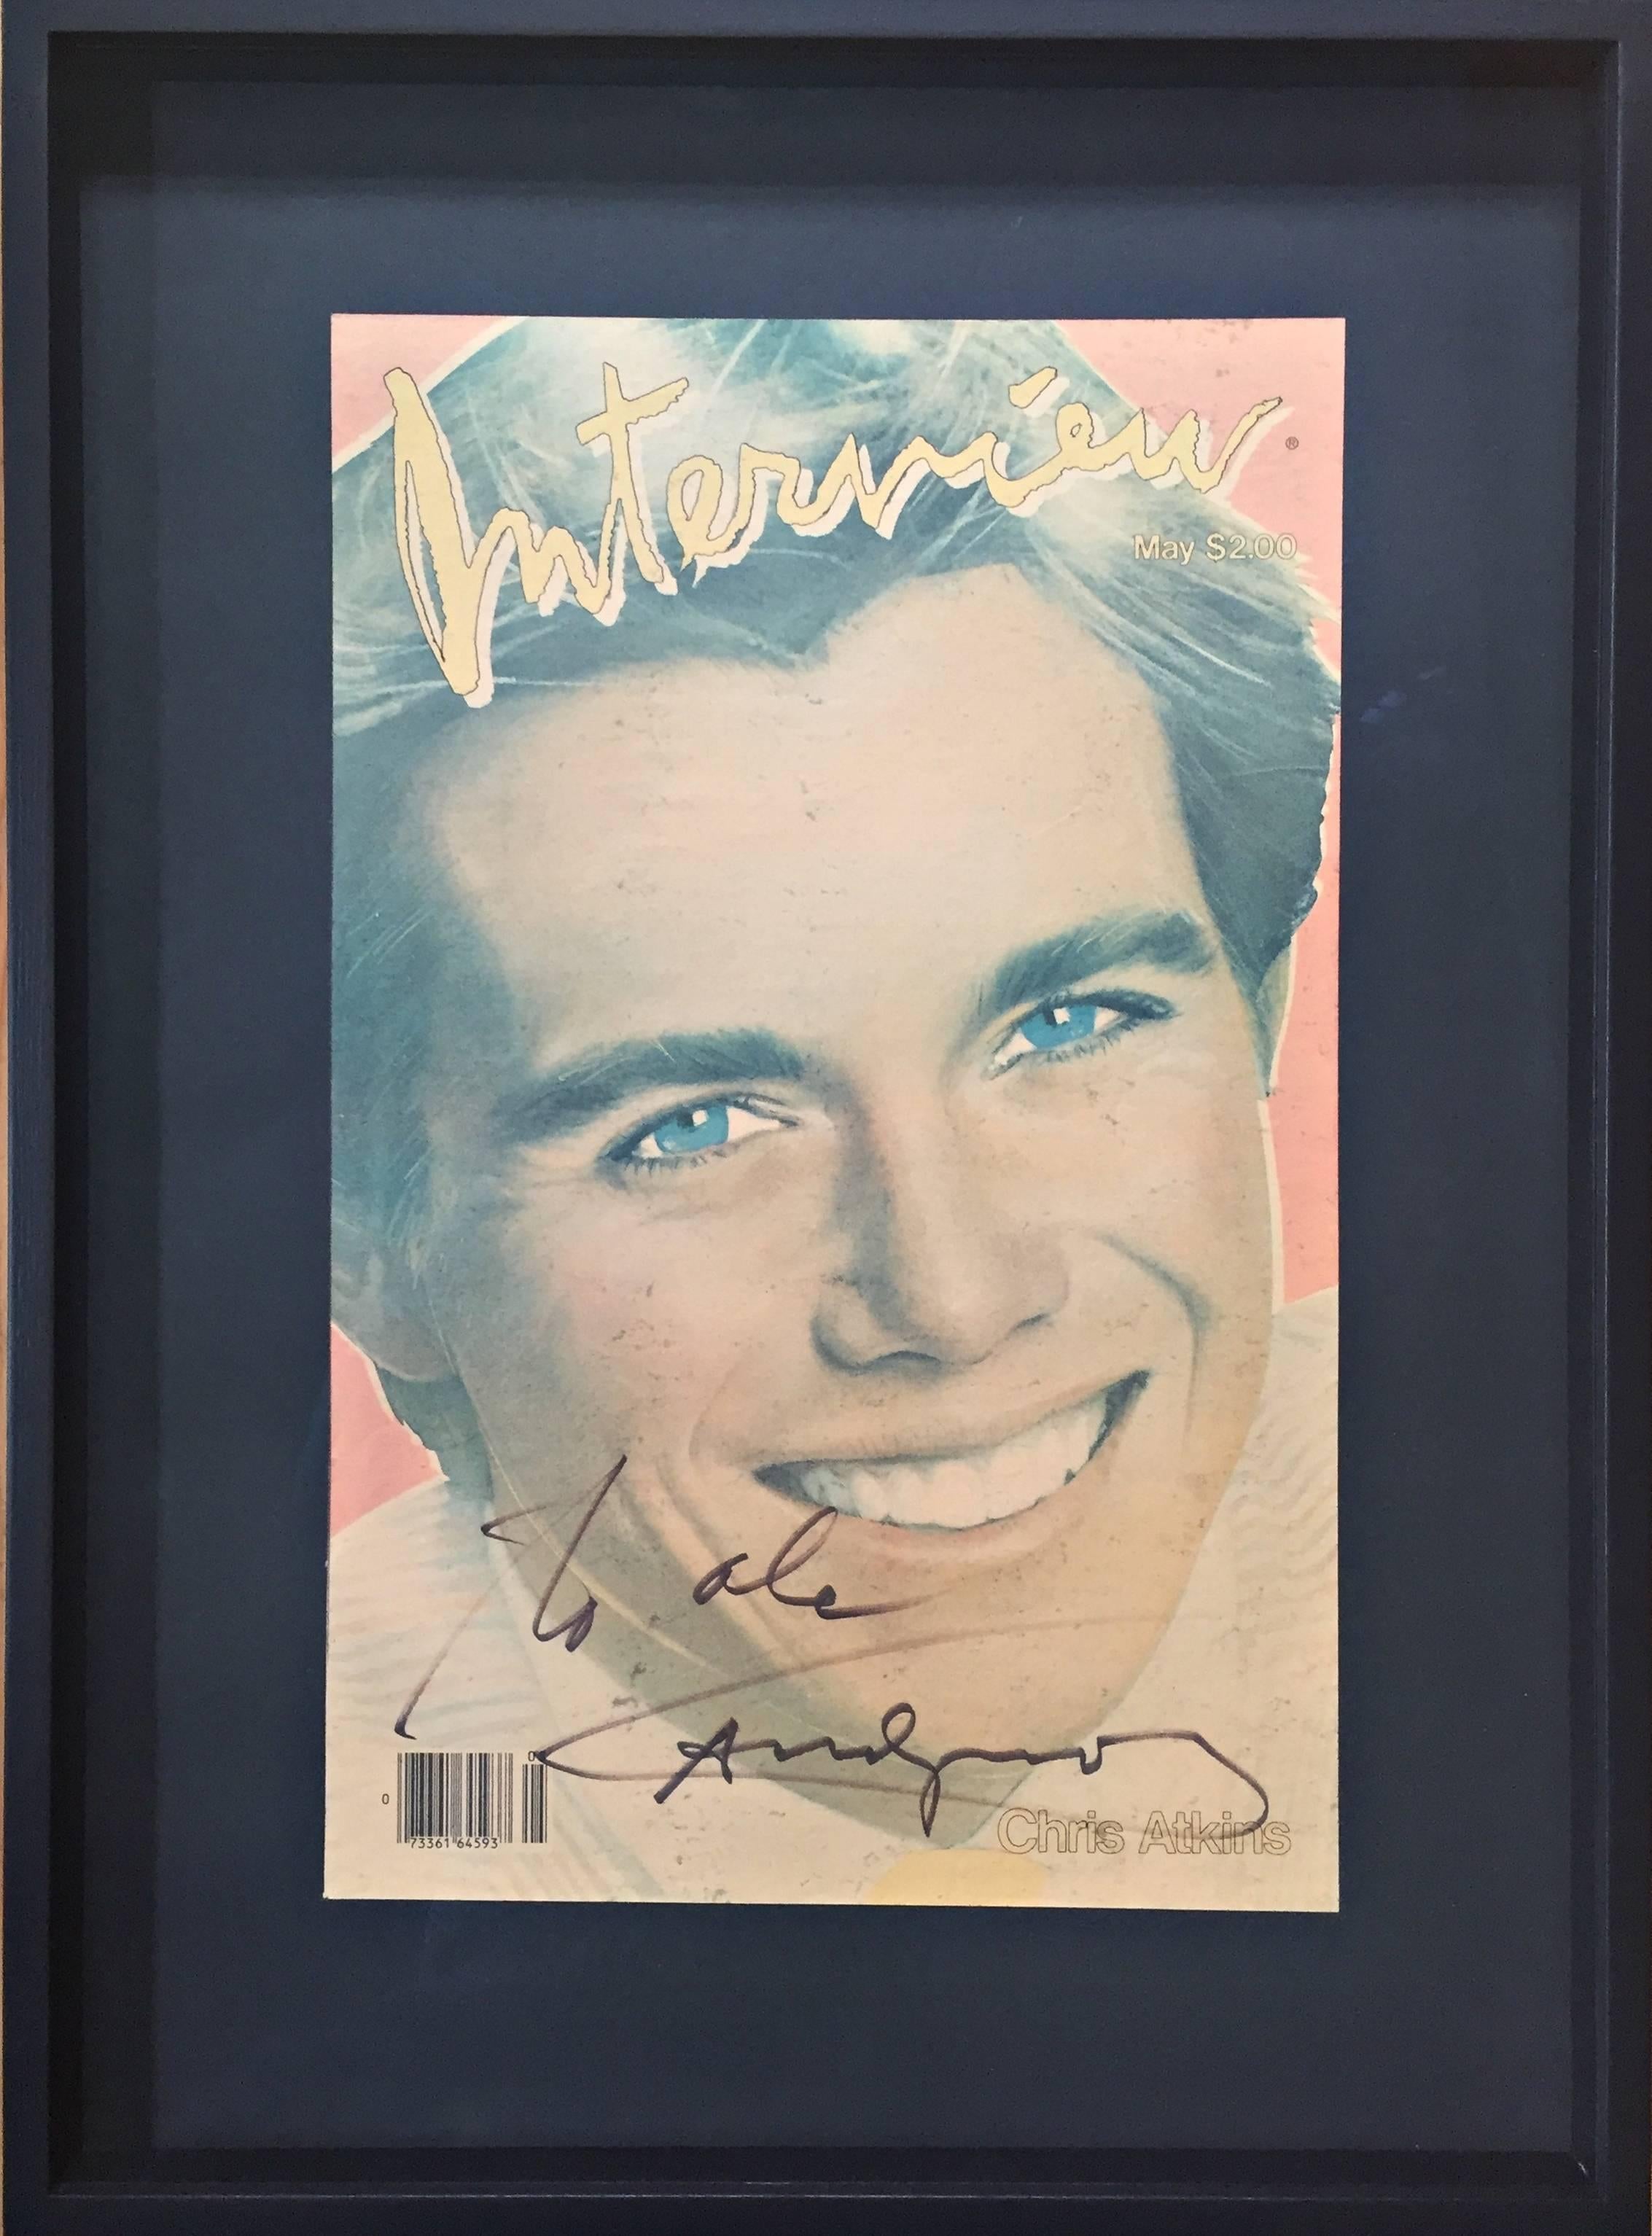 Interview, Chris Atkins, Hand signed - Art by Andy Warhol